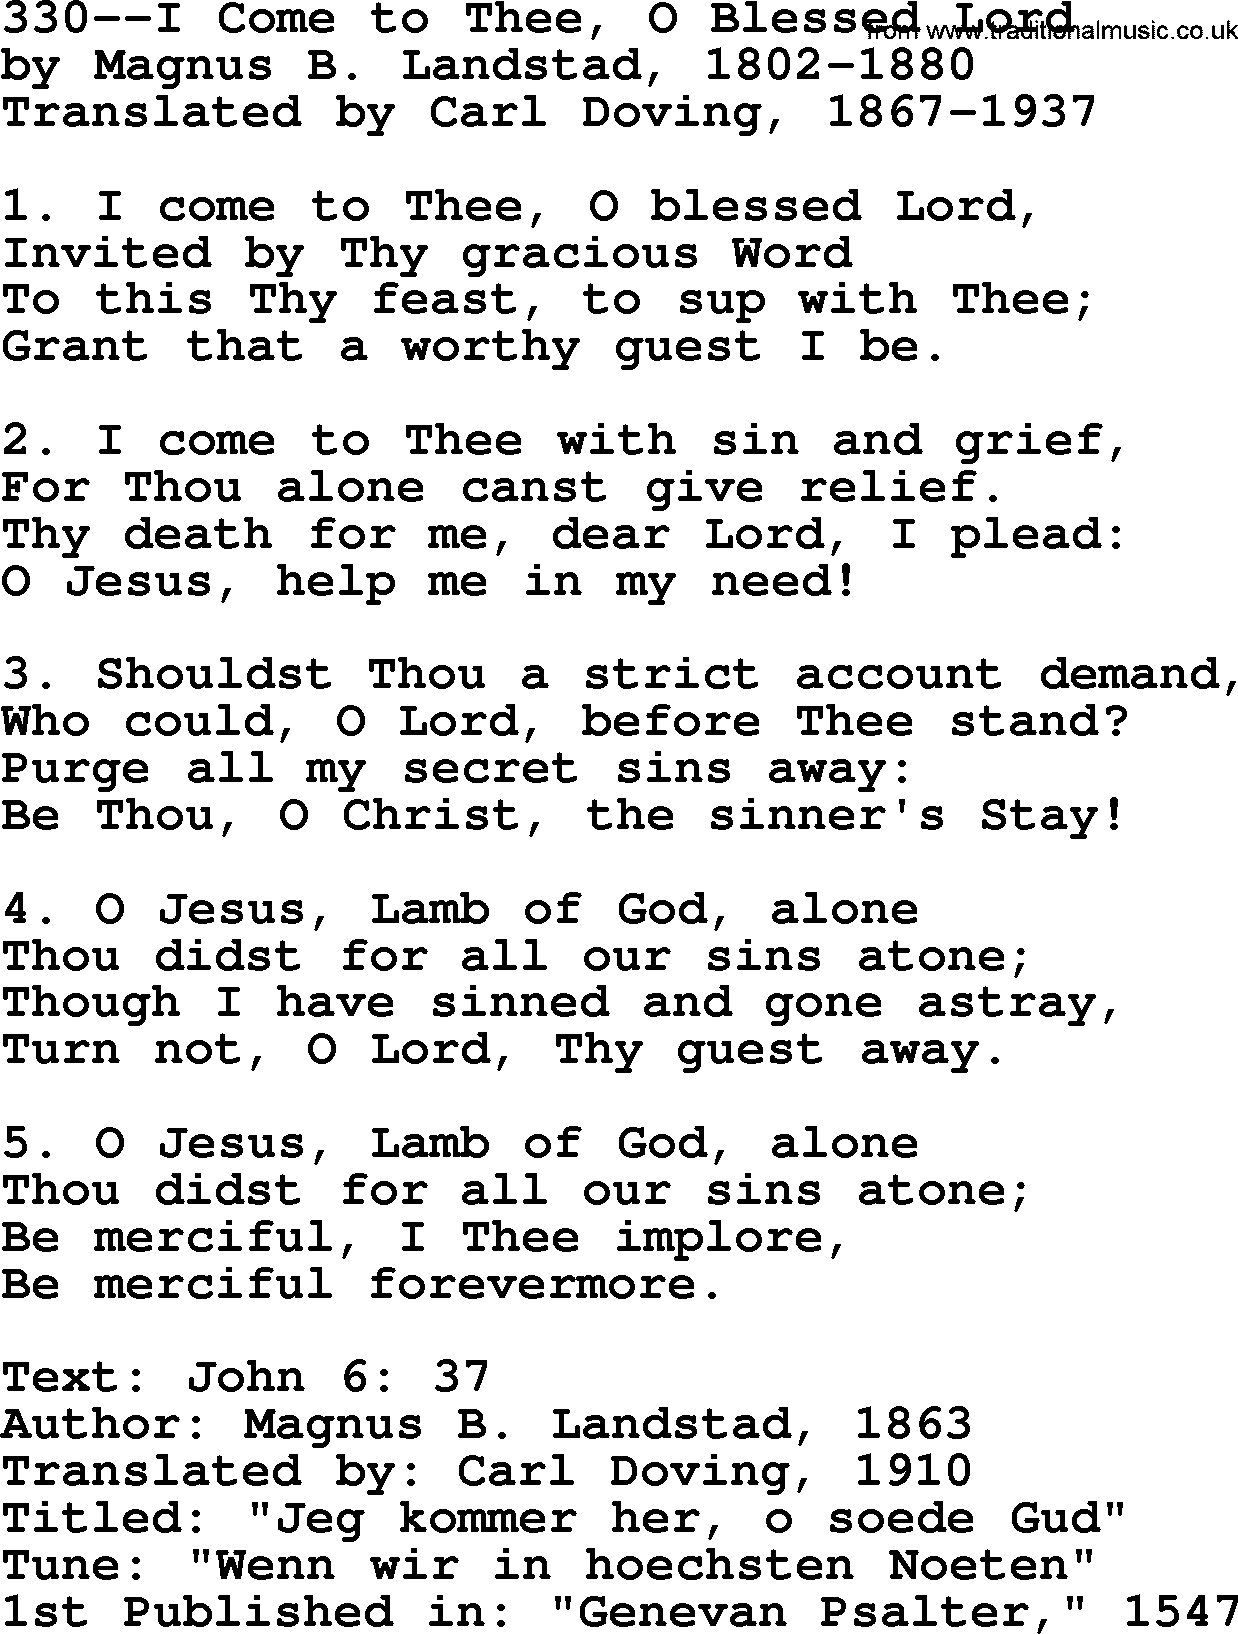 Lutheran Hymn: 330--I Come to Thee, O Blessed Lord.txt lyrics with PDF